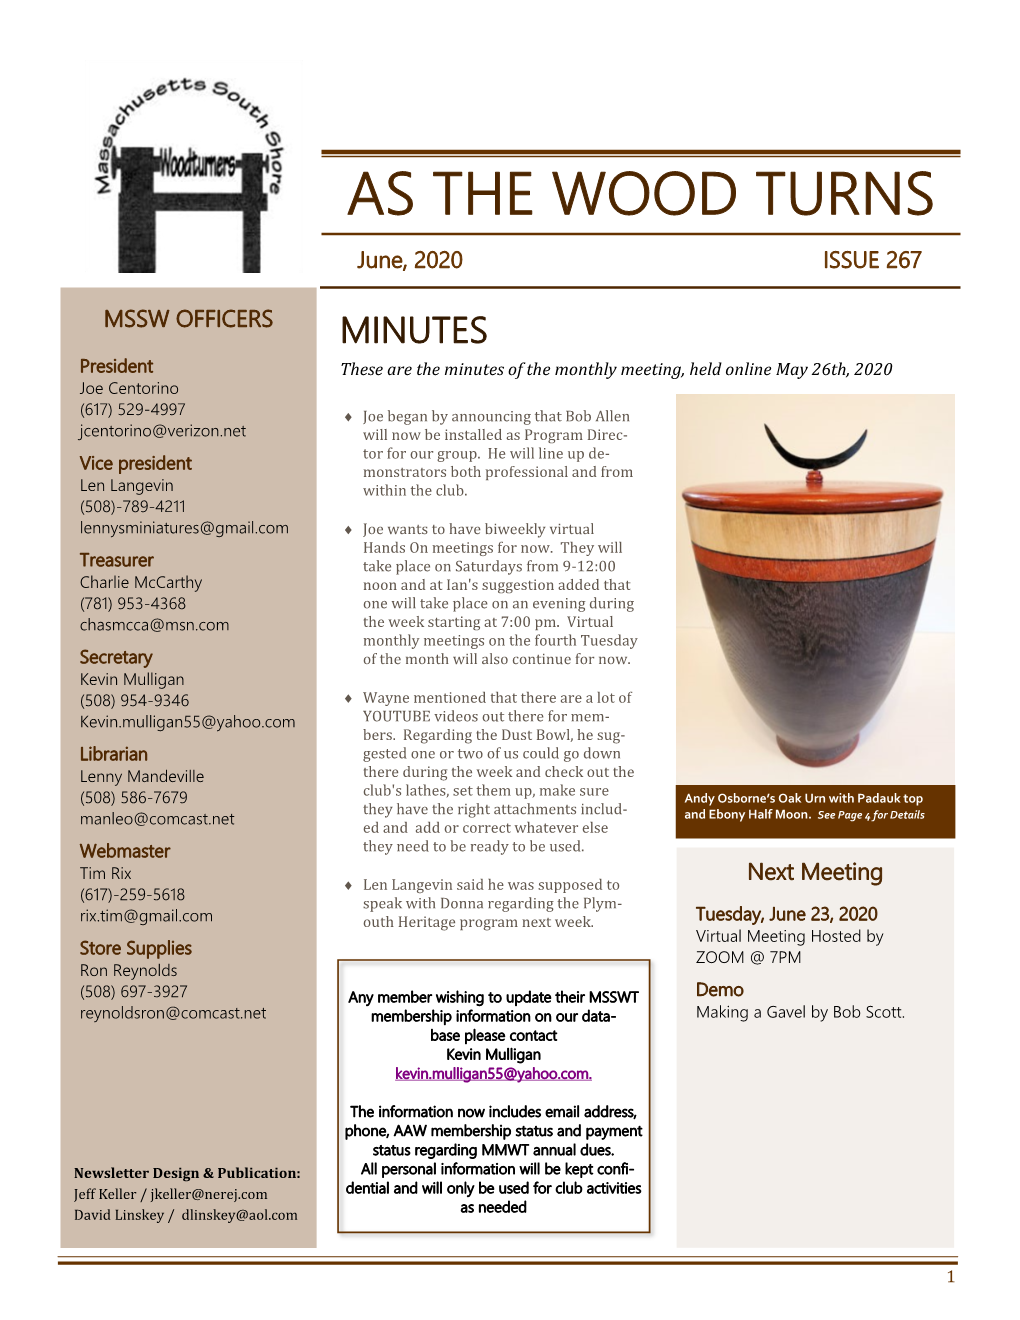 AS the WOOD TURNS June, 2020 ISSUE 267